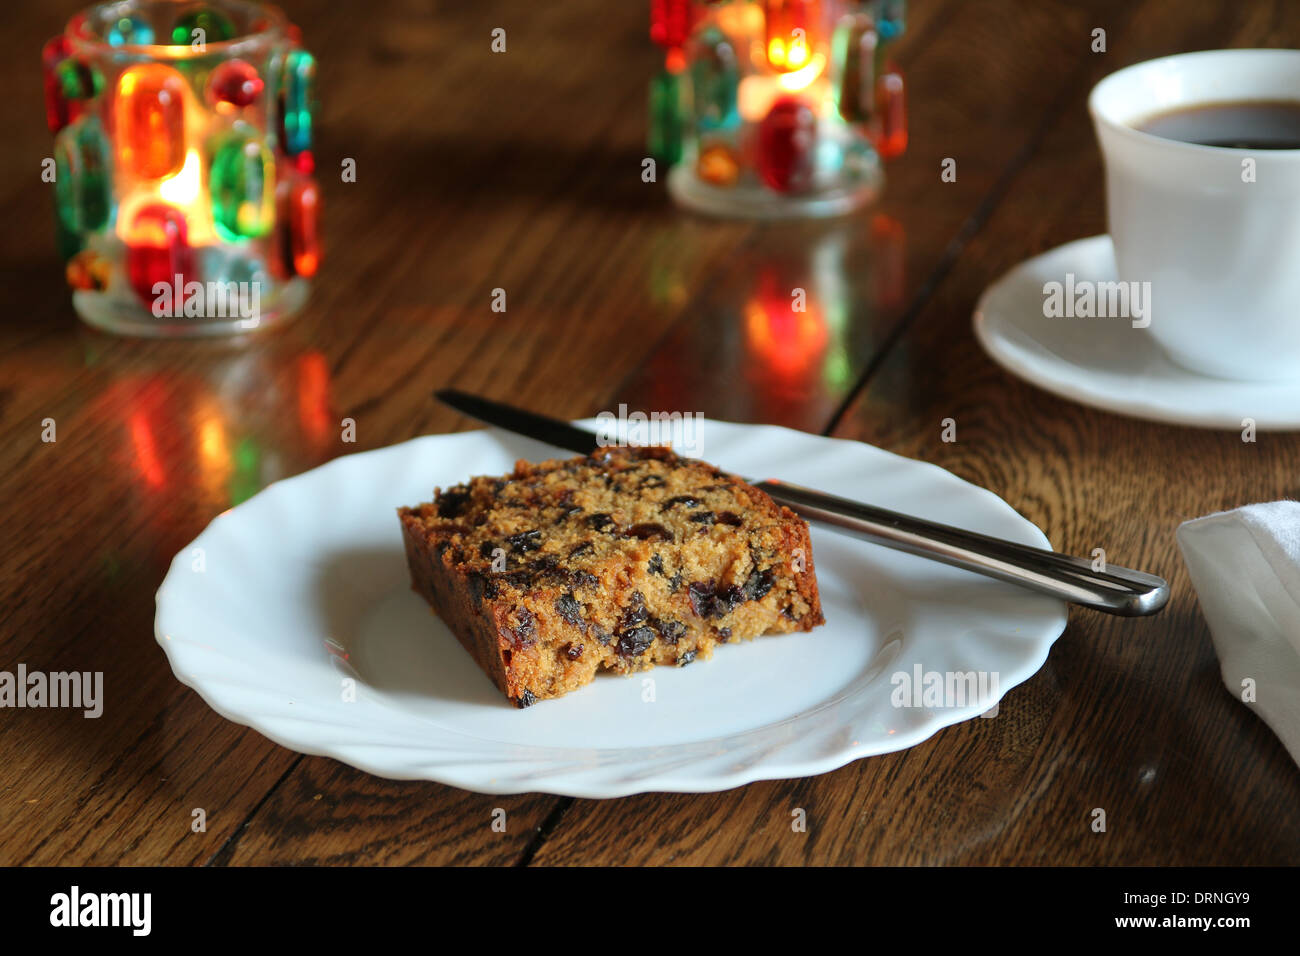 A slice of rich fruit cake, with no icing on a plate with a cup of coffee and candles in background (8 of a series of 8 Stock Photo